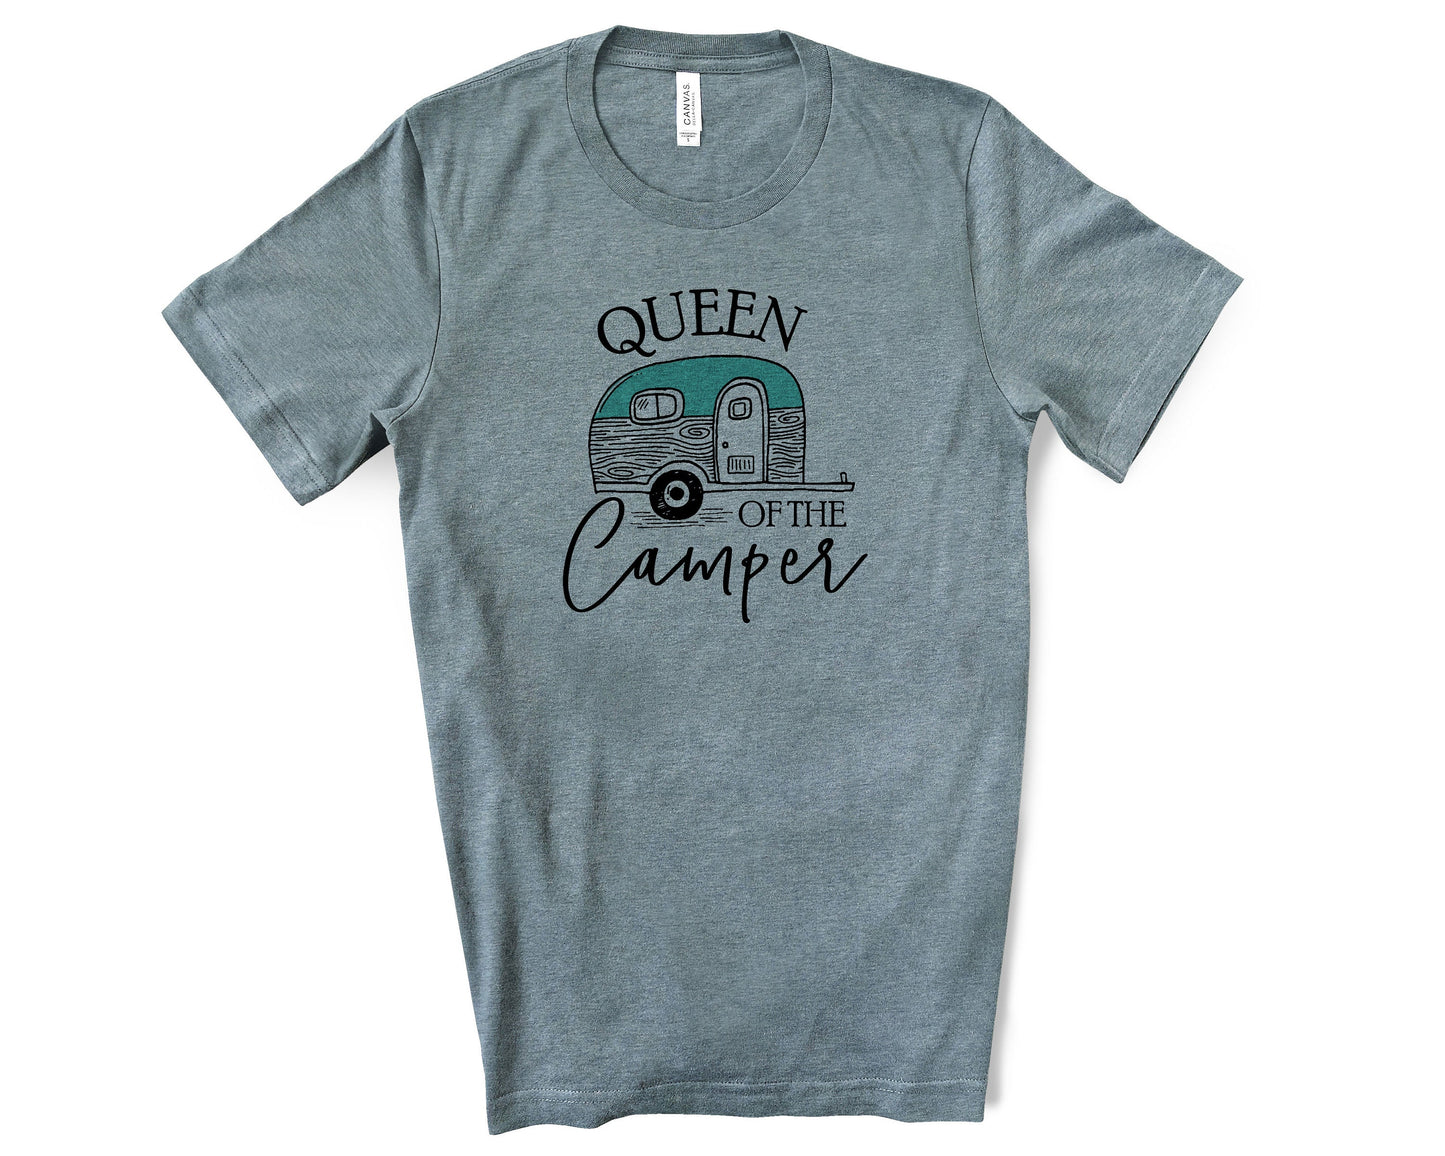 Queen of the Camper - Camp Shirt - Women Shirts with Sayings